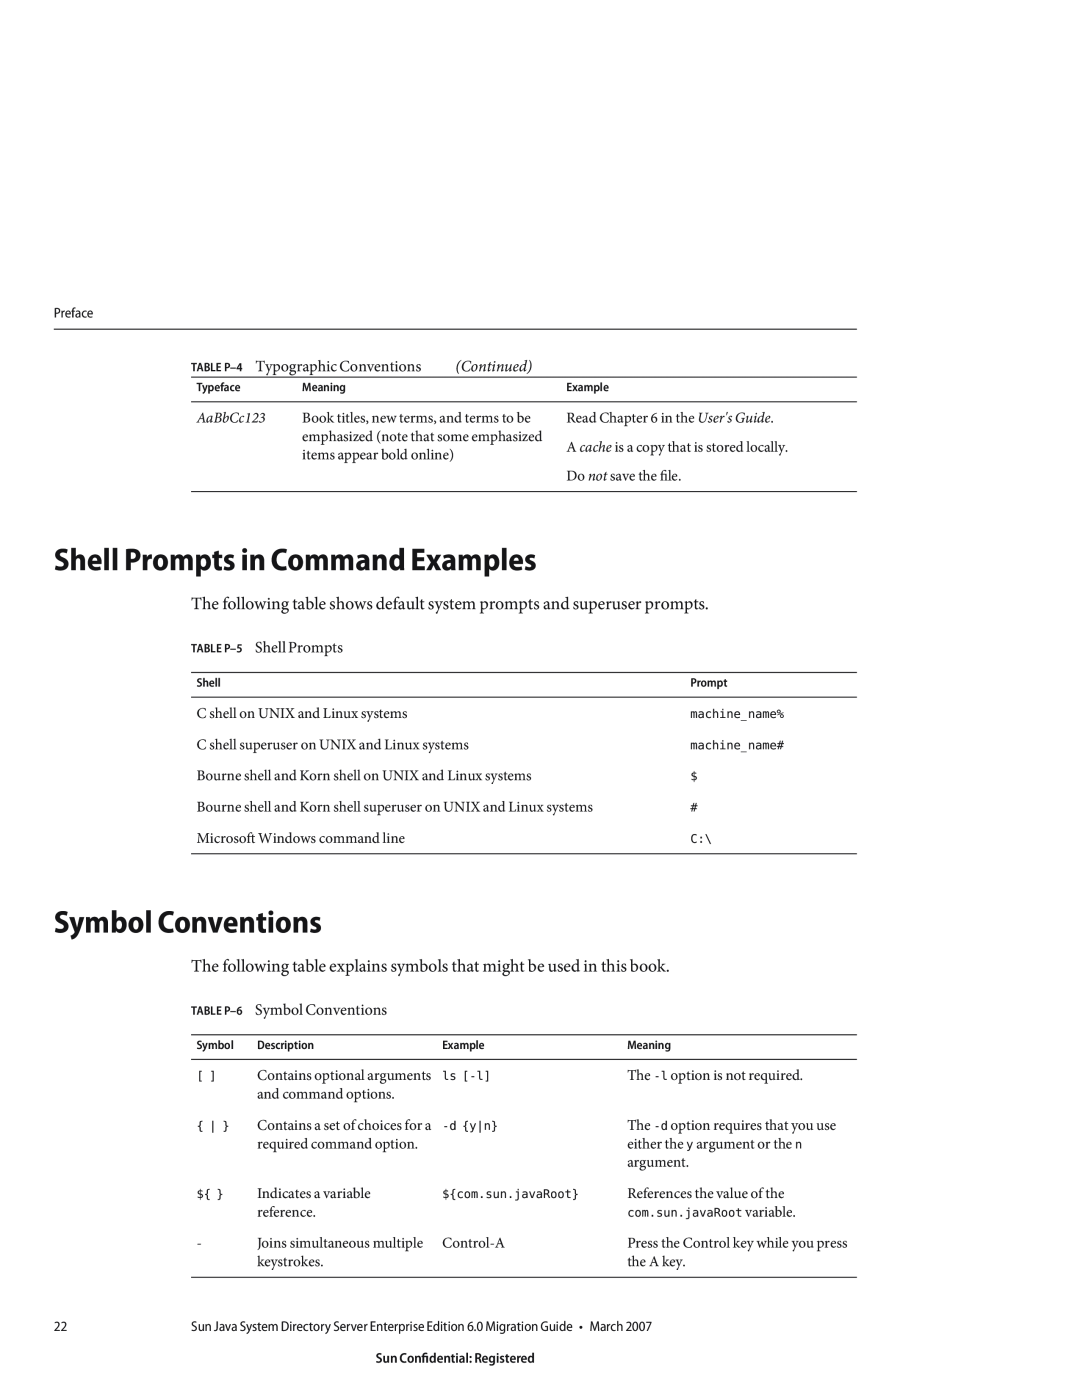 Sun Microsystems 8190994 manual Shell Prompts in Command Examples, Symbol Conventions, Continued, TABLE P-5 Shell Prompts 